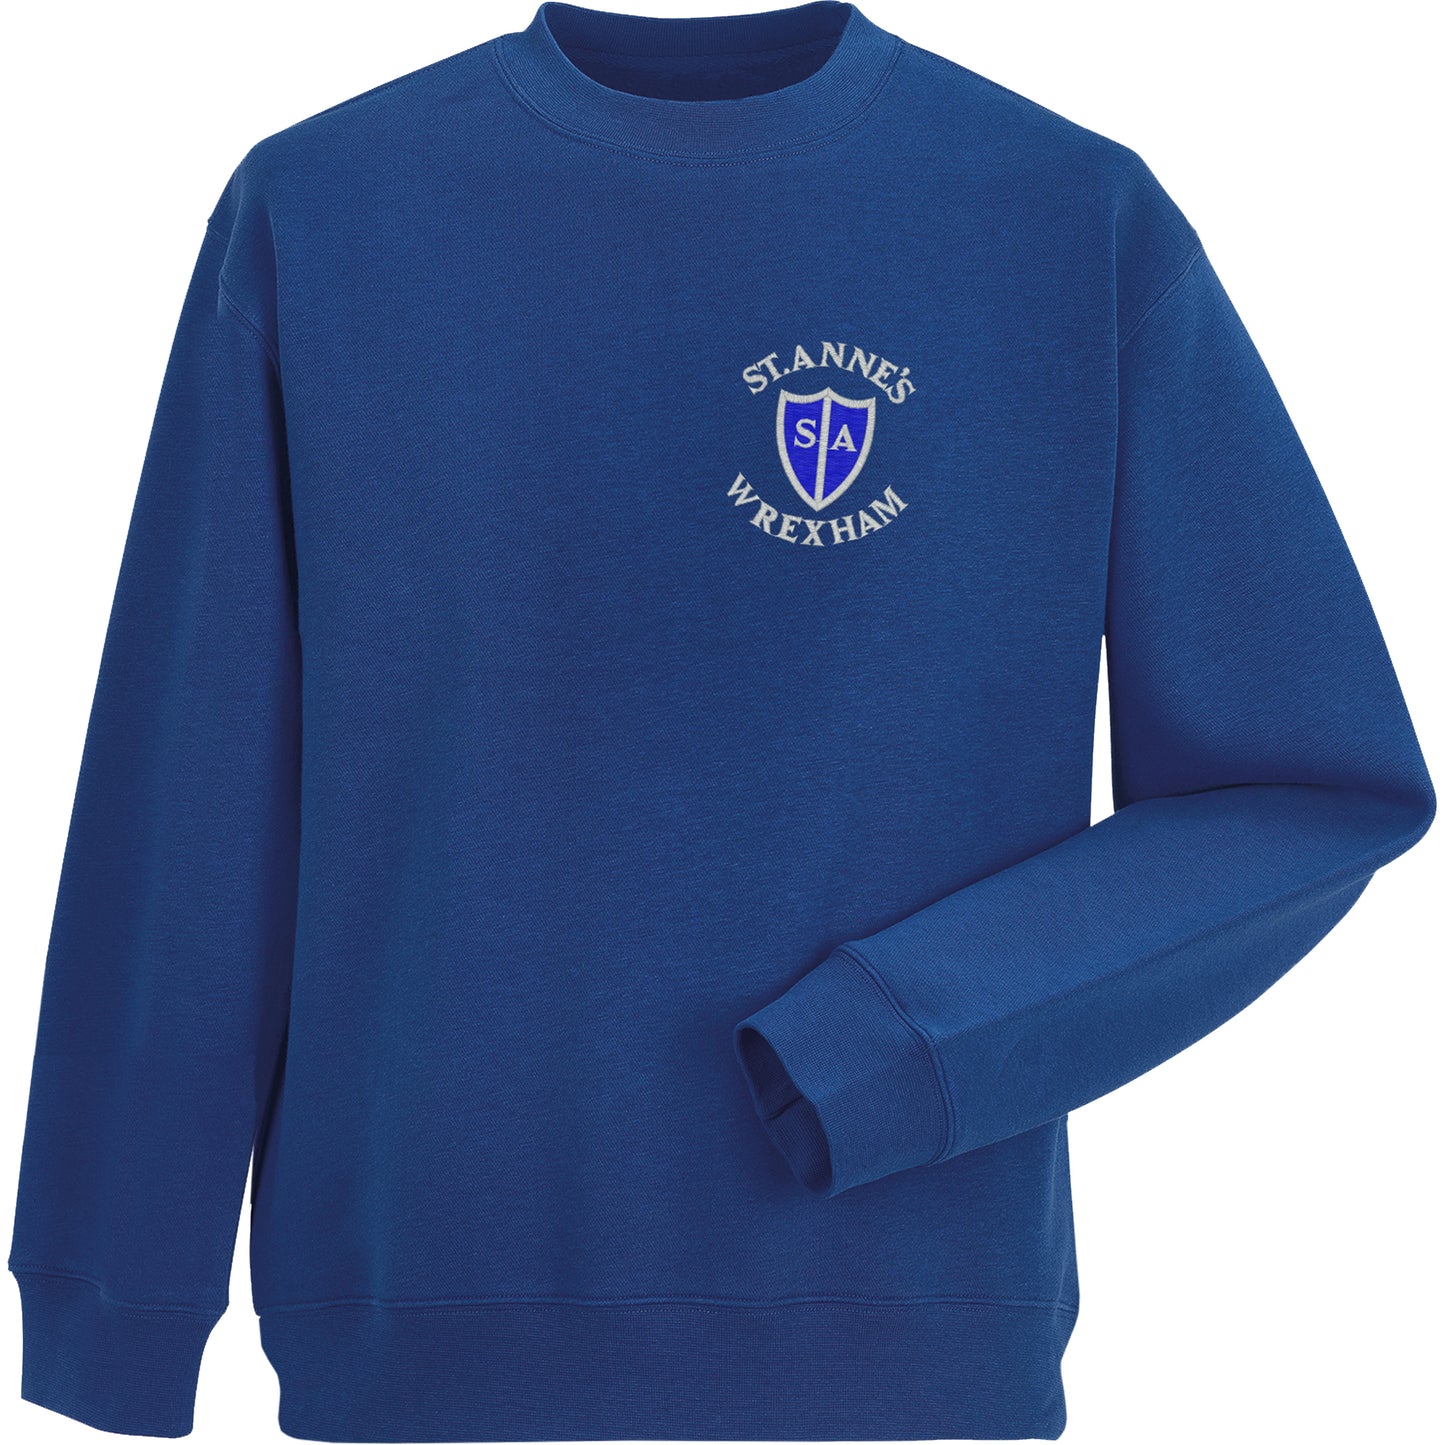 St. Annes School Sweaters are supplied by ourschoolwear of Wrexham